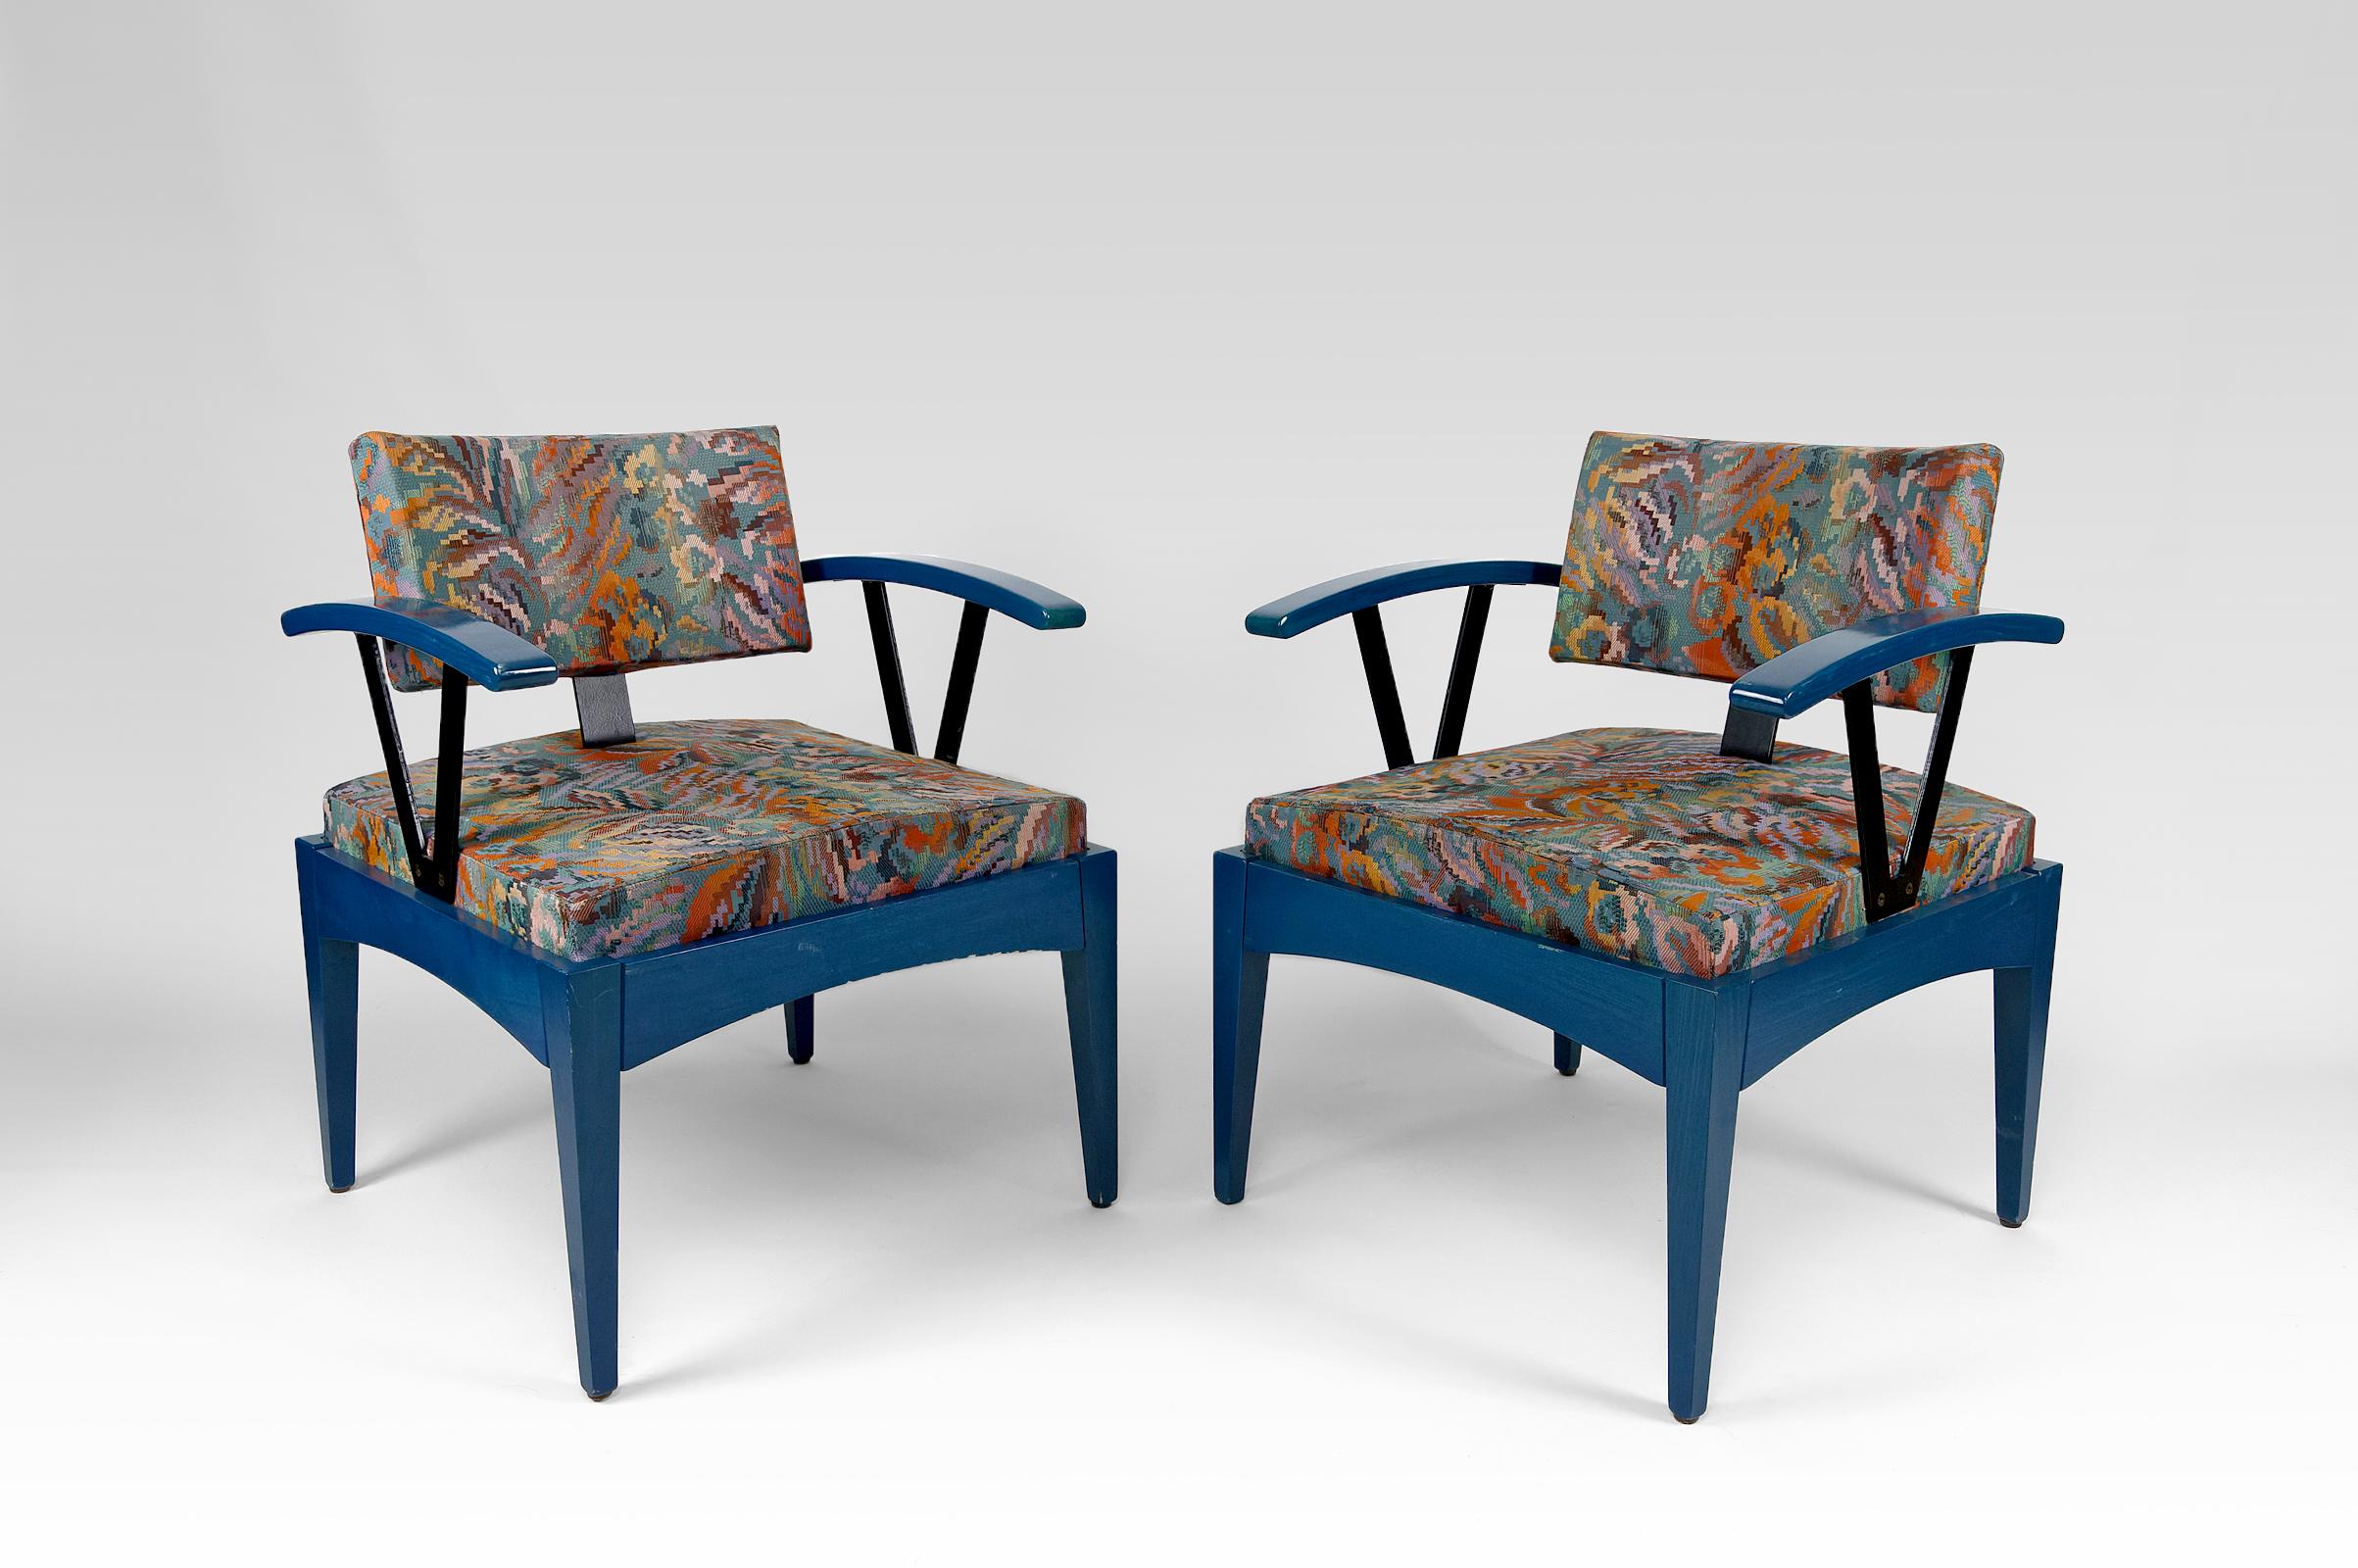 Rare pair of designer armchairs by Baumann.
Manufacturer's label present.
France, circa 1970-1980
In good condition.

Dimensions:
height 79 cm
seat height 45 cm
width 62 cm
depth 62 cm